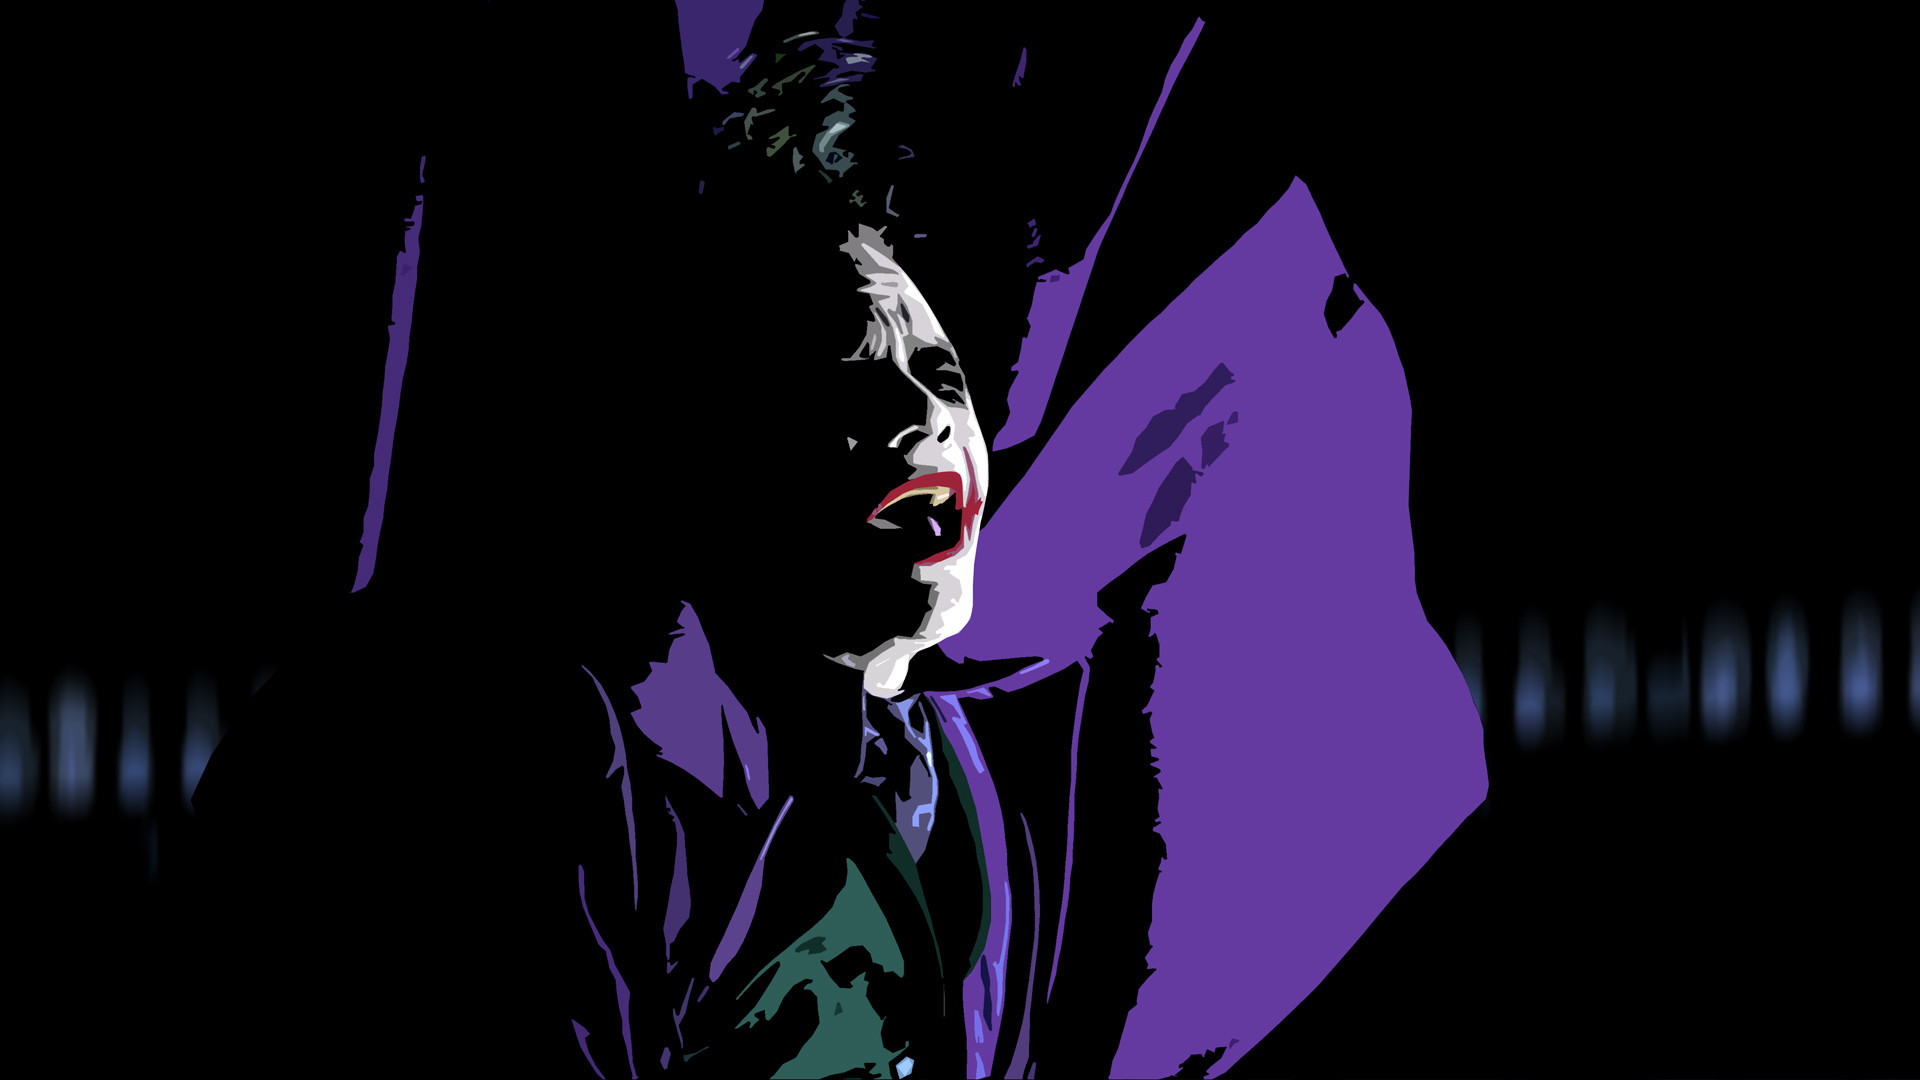 Backgrounds For > Animated Joker Hd Wallpapers 1080p